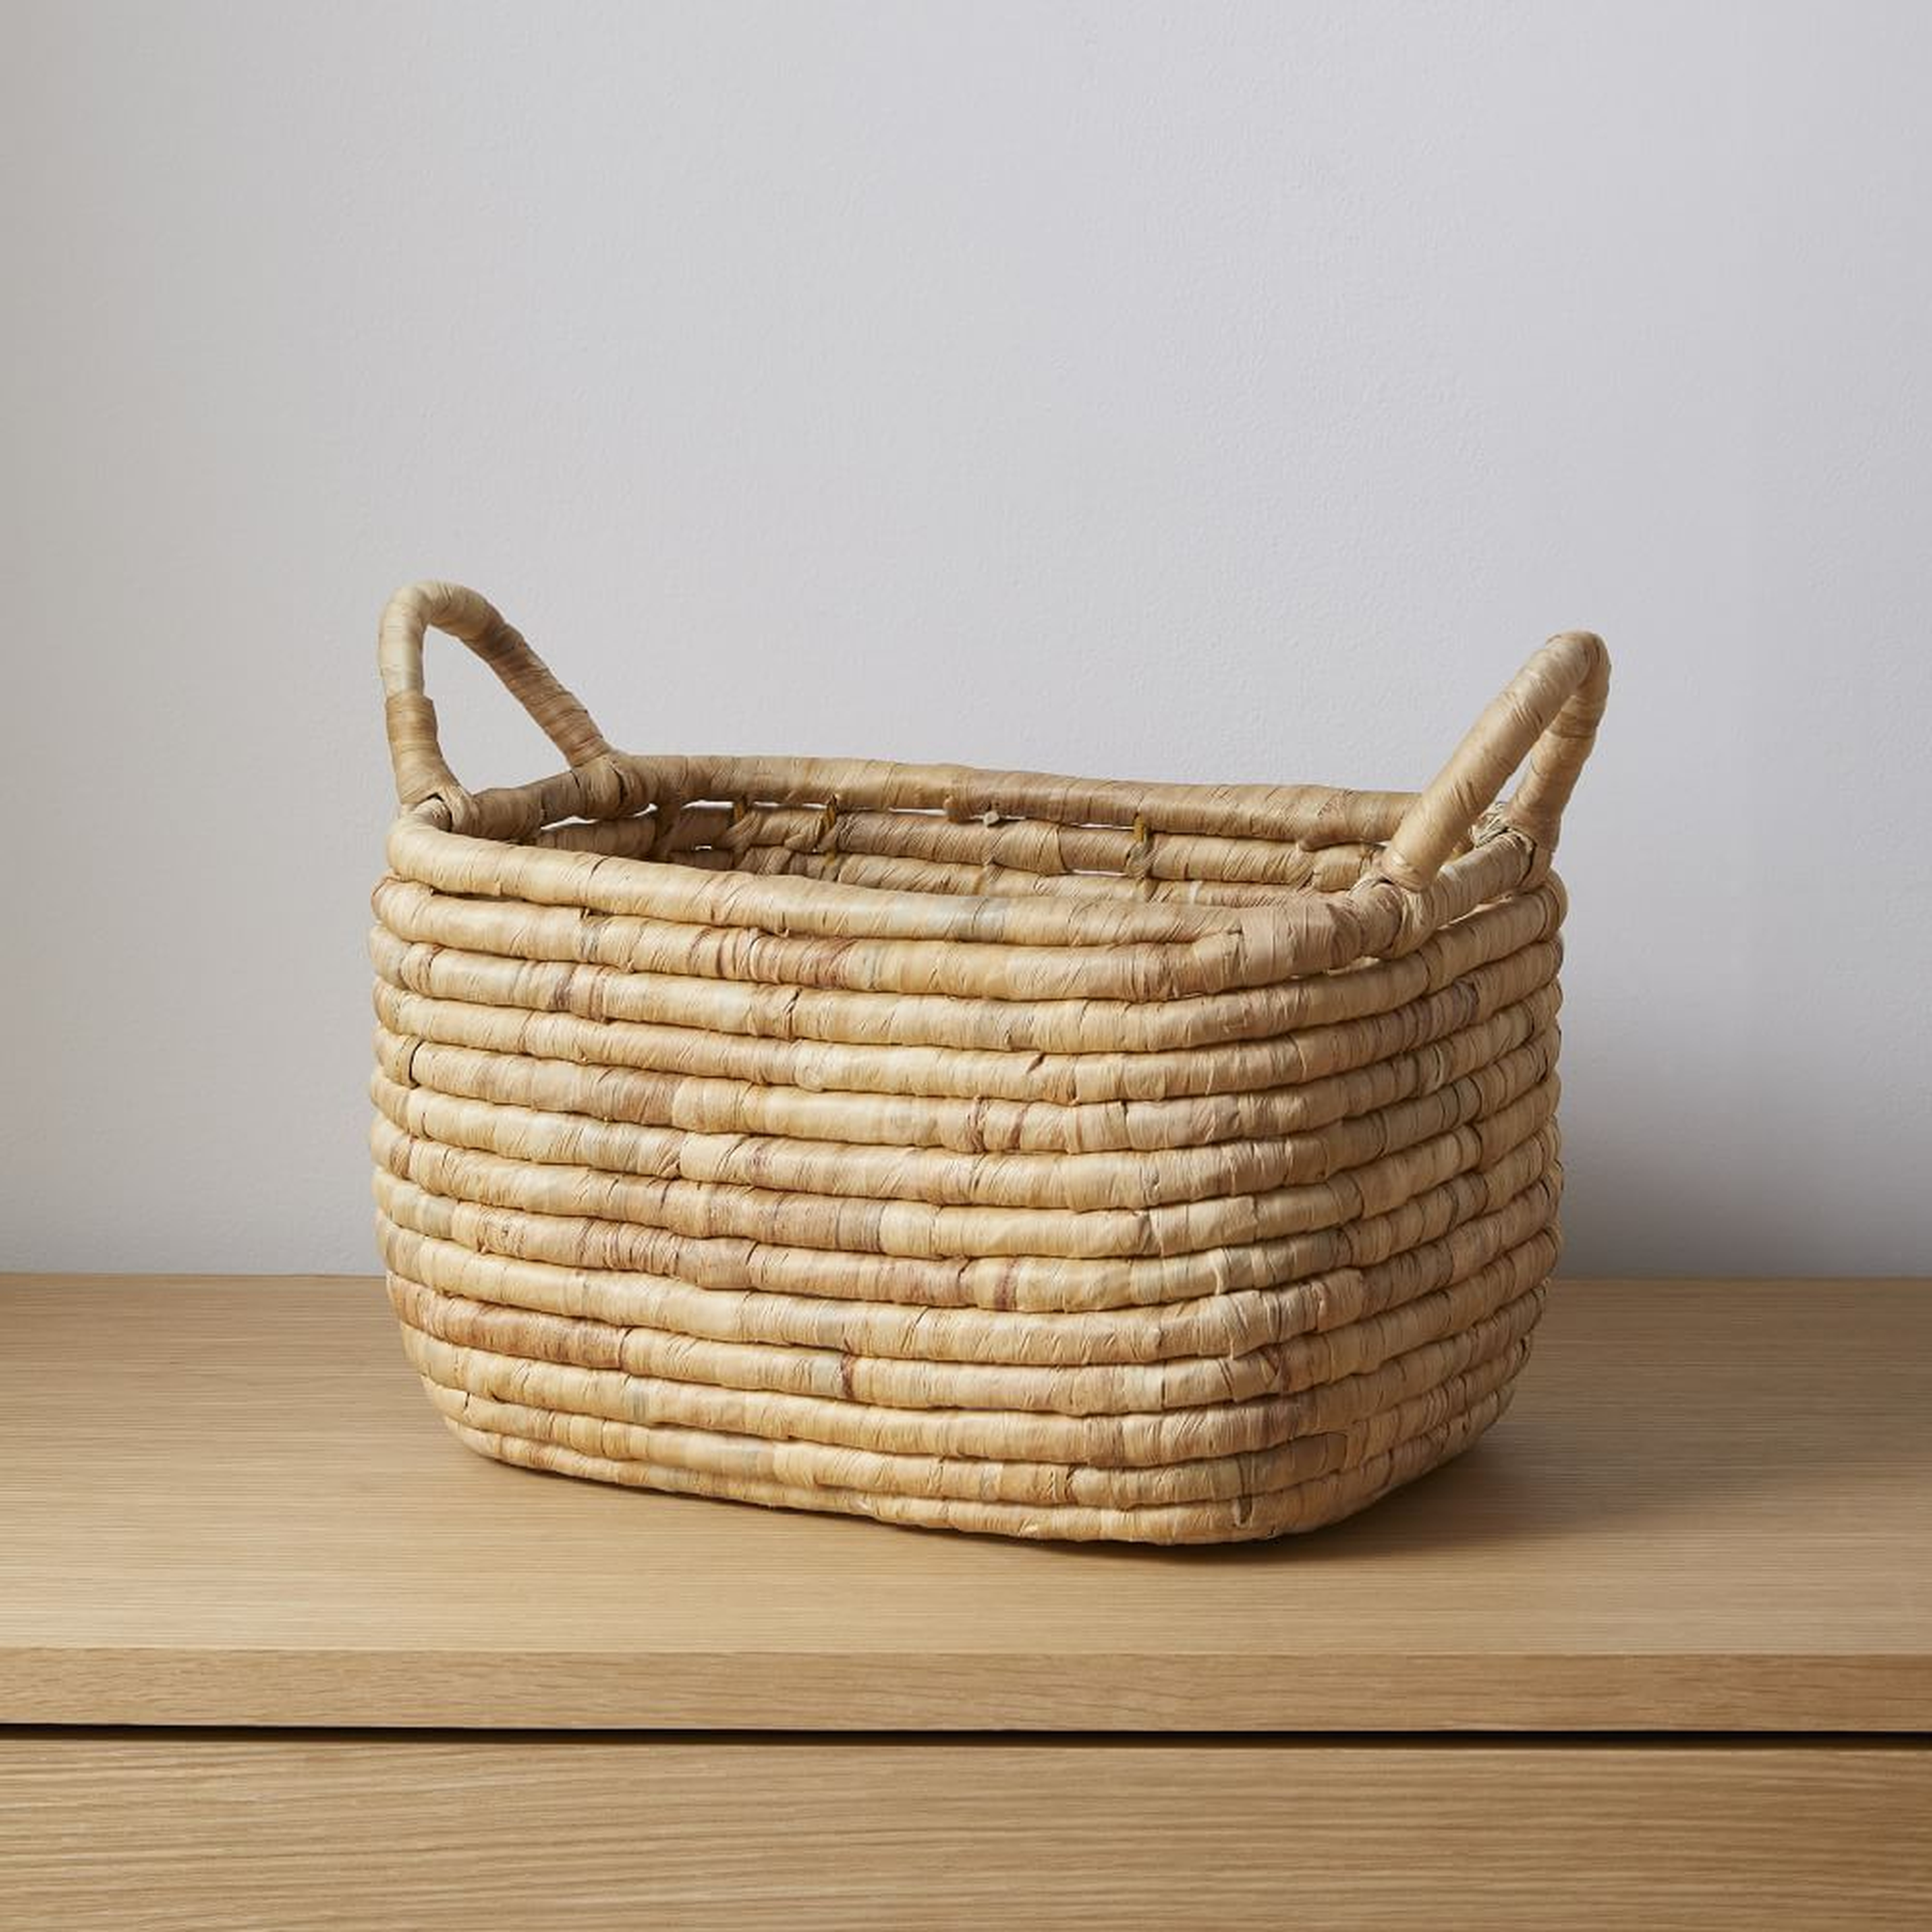 Woven Seagrass, Handle Baskets, Natural, Small, 14.5"W x 10.5"D x 8.5"H - West Elm